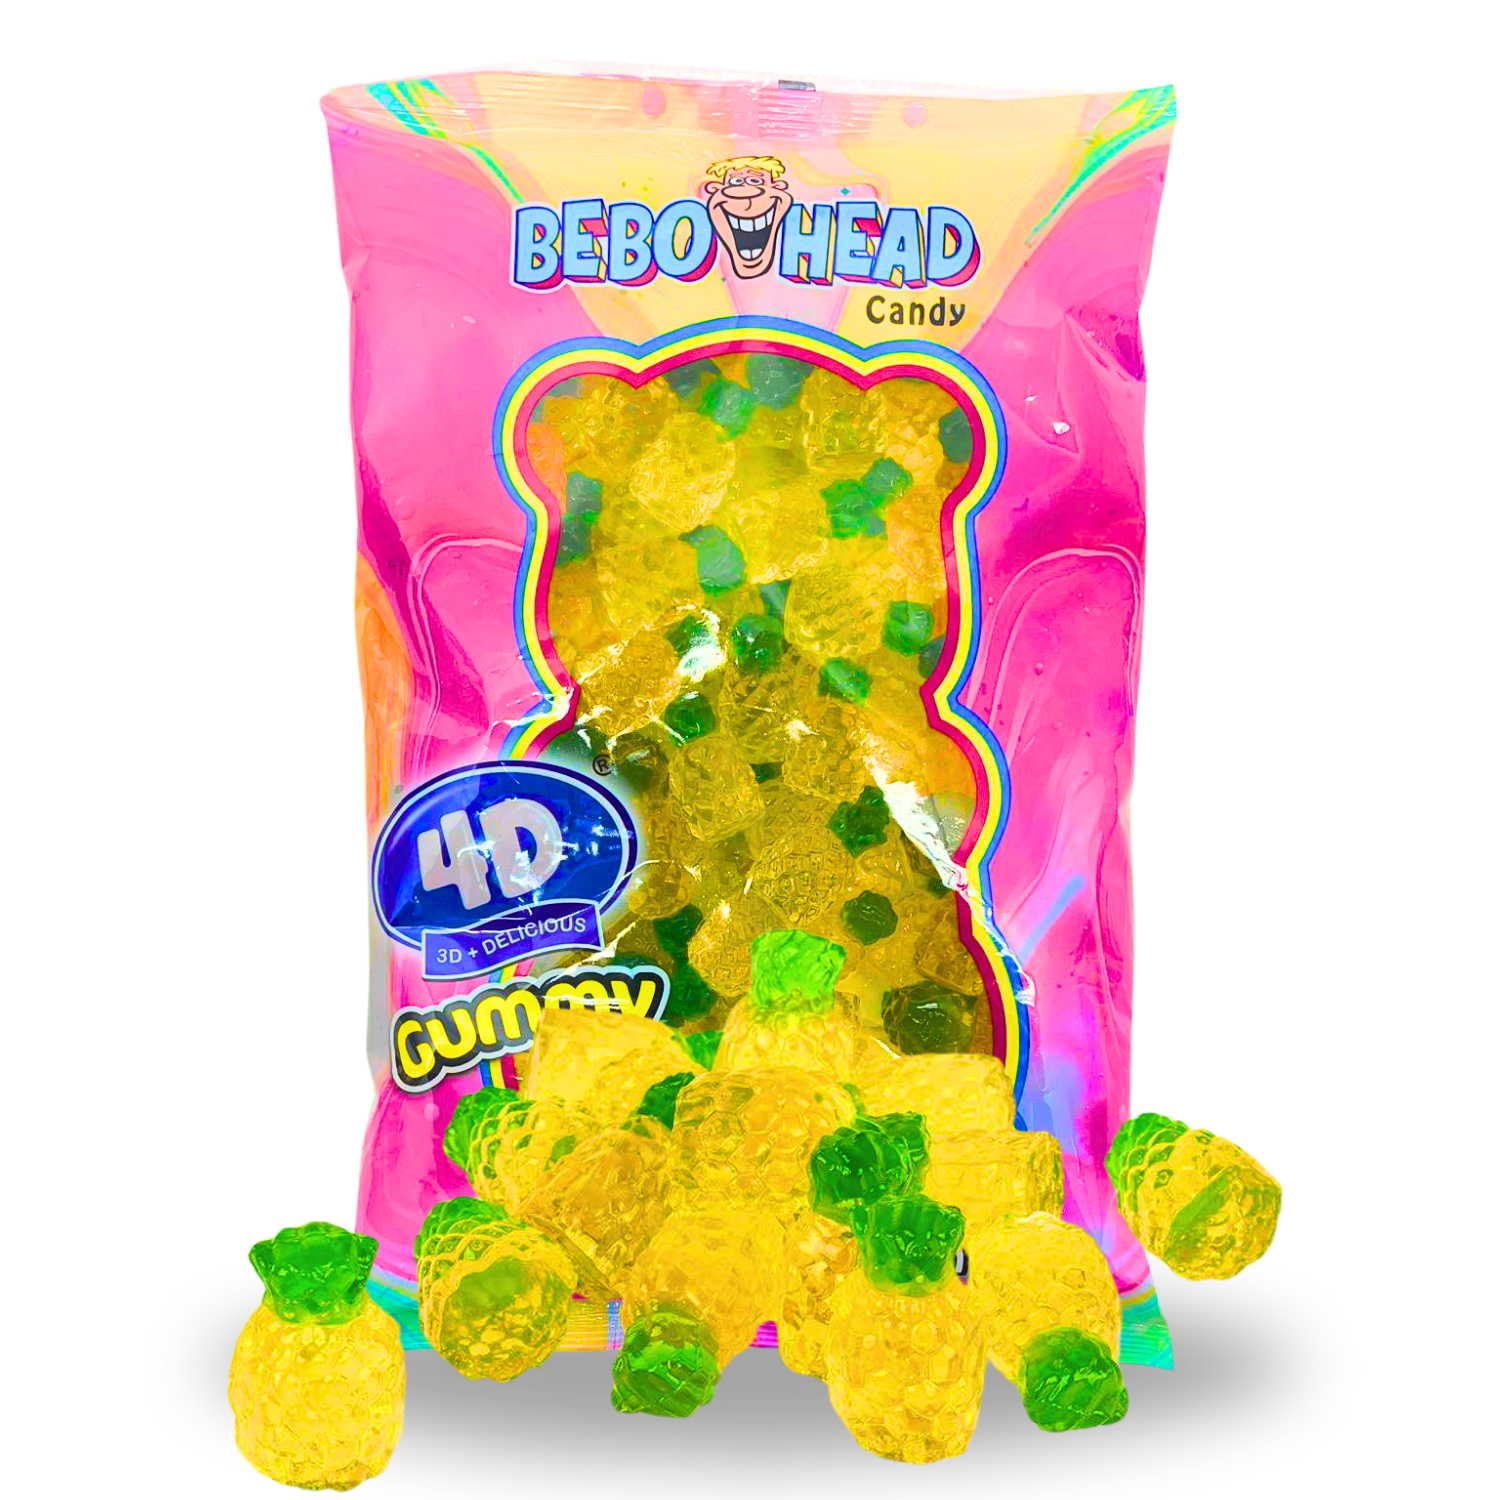 4D Gummy Pineapples- 2.2 Pounds